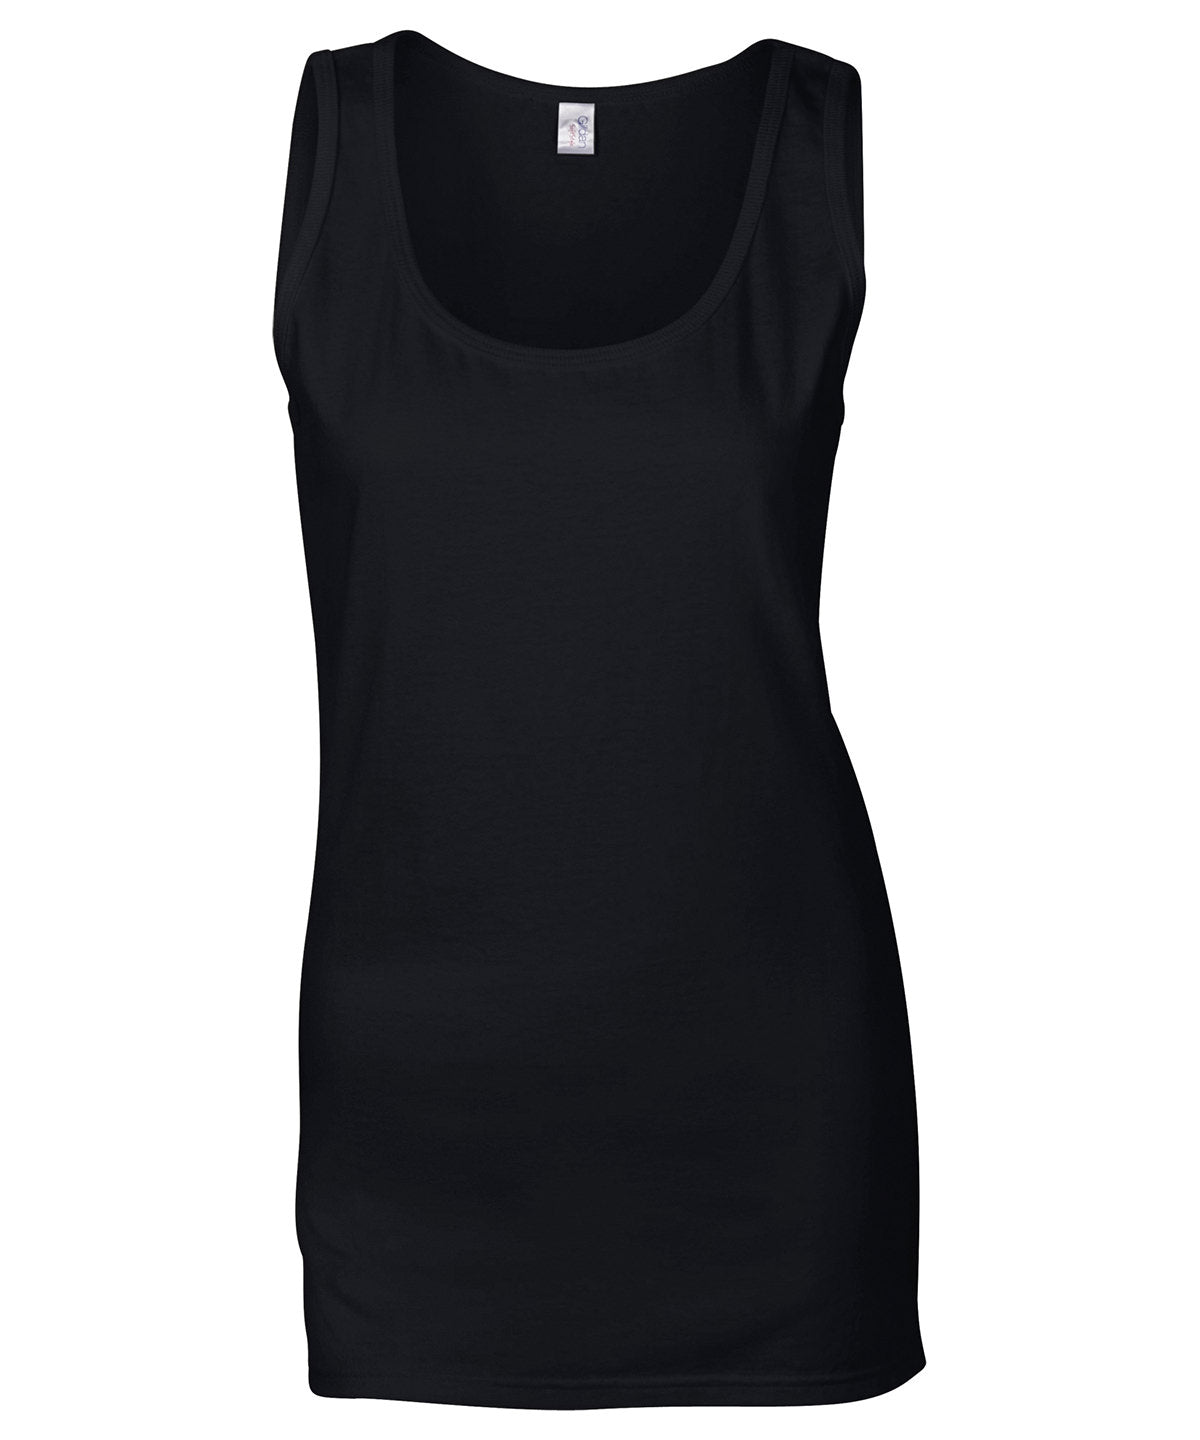 Softstyle womens tank top | Black